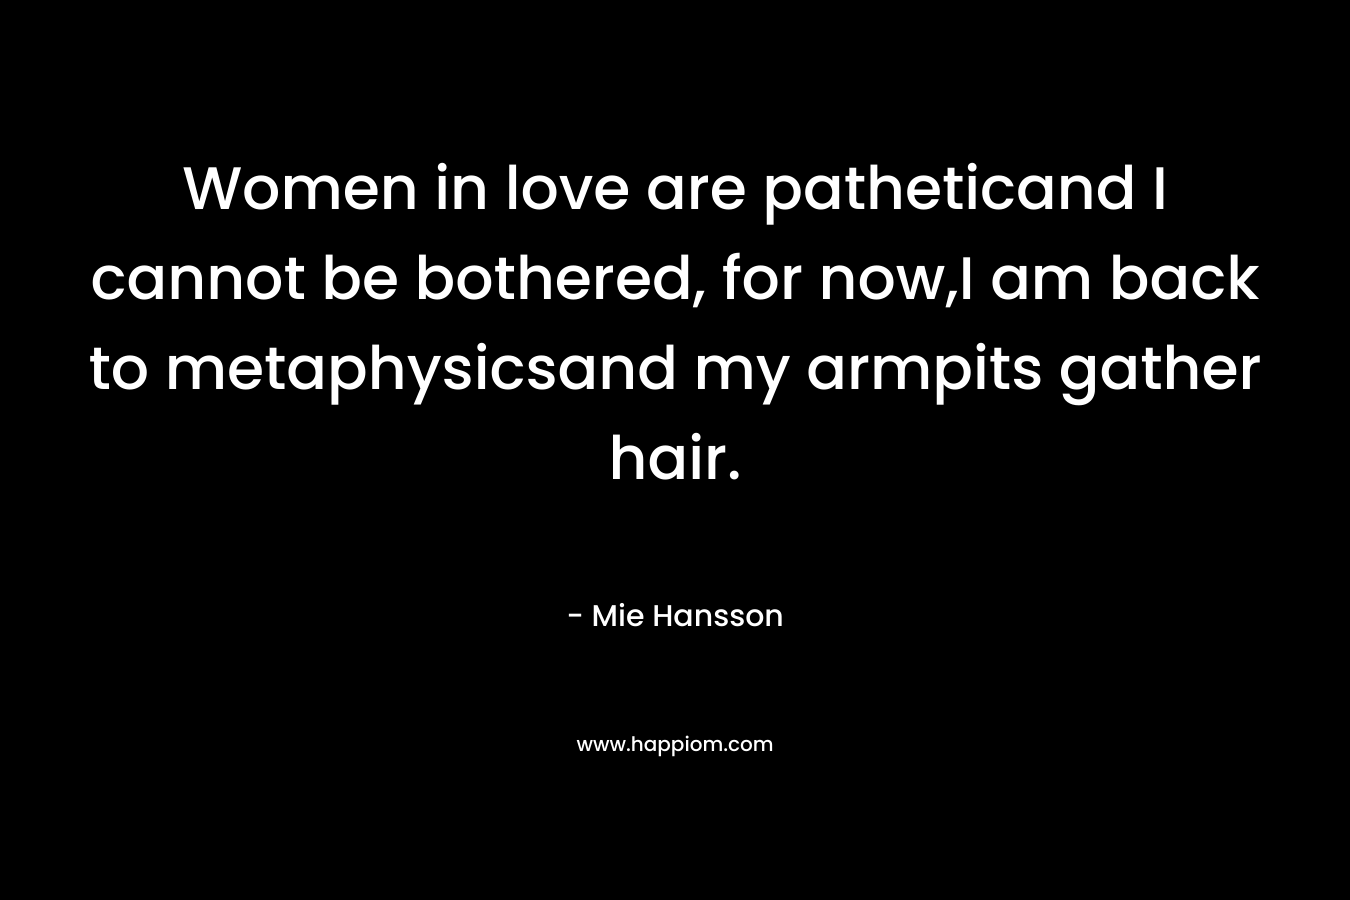 Women in love are patheticand I cannot be bothered, for now,I am back to metaphysicsand my armpits gather hair.